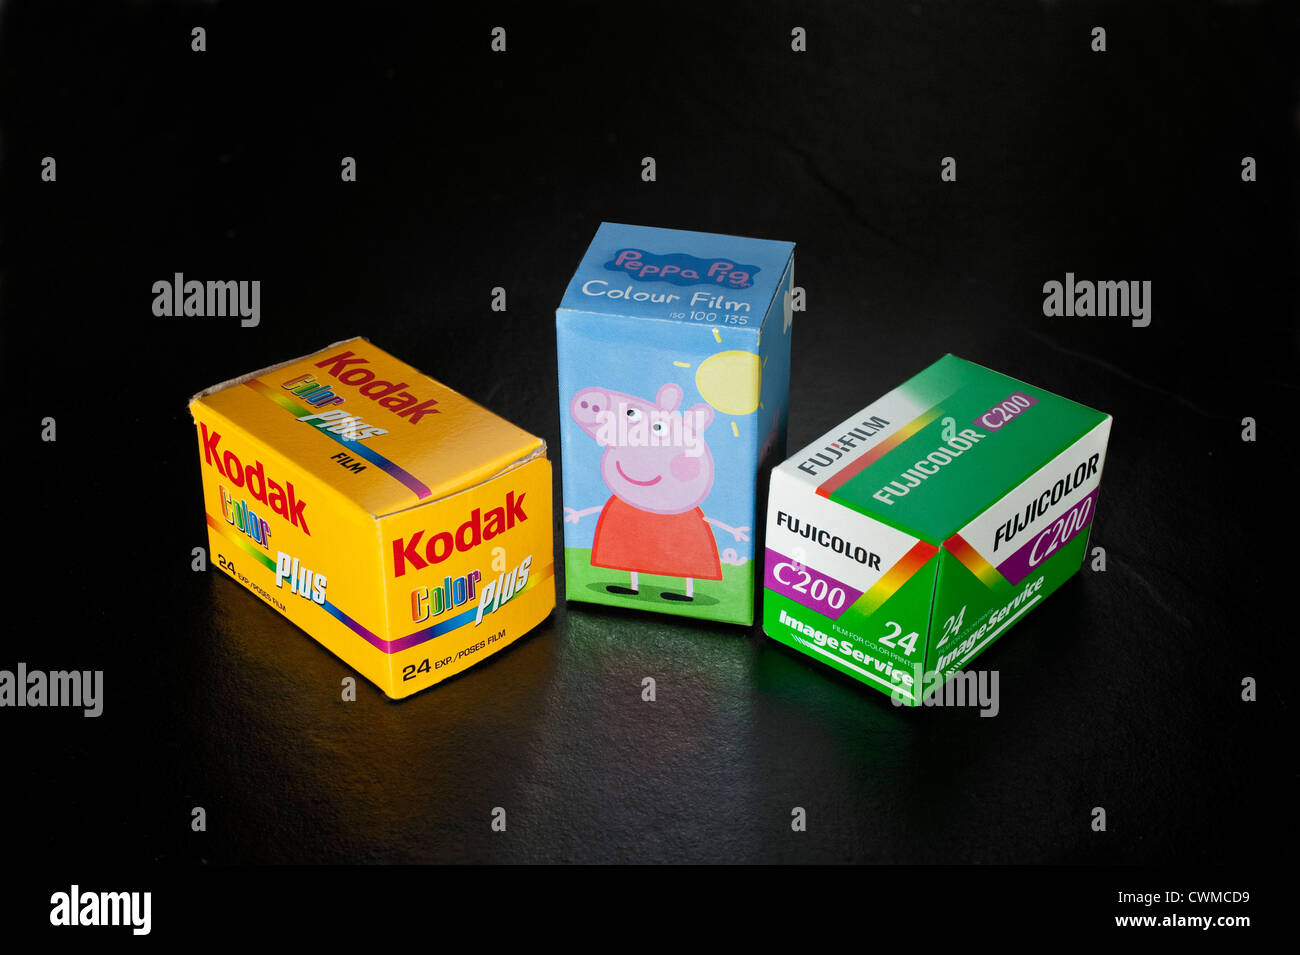 Boxes of 35mm photographic colour film, Kodak and Fuji, with a Peppa Pig branded one Stock Photo